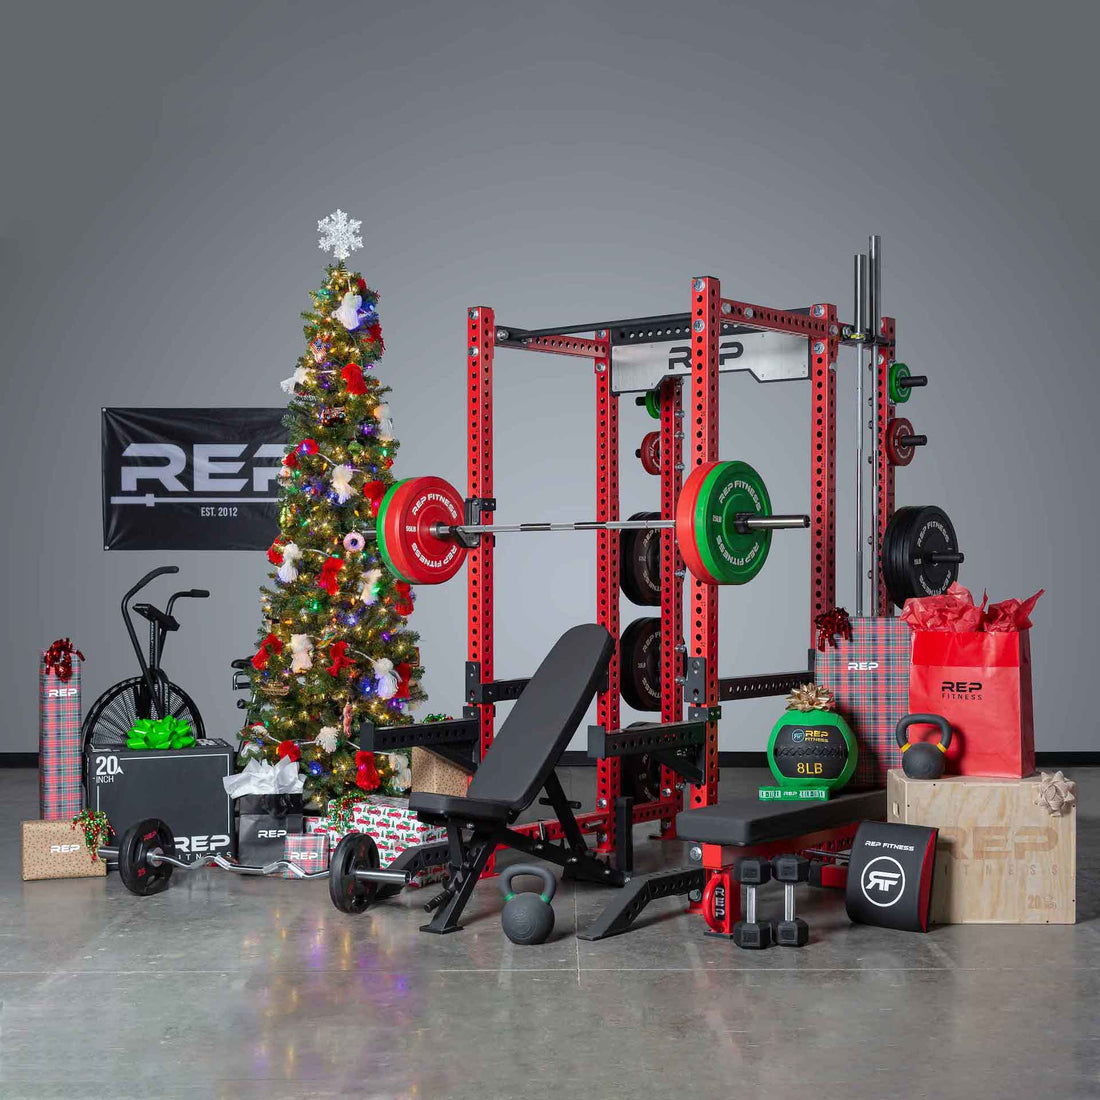 A home gym and gym equipment by a Christmas tree